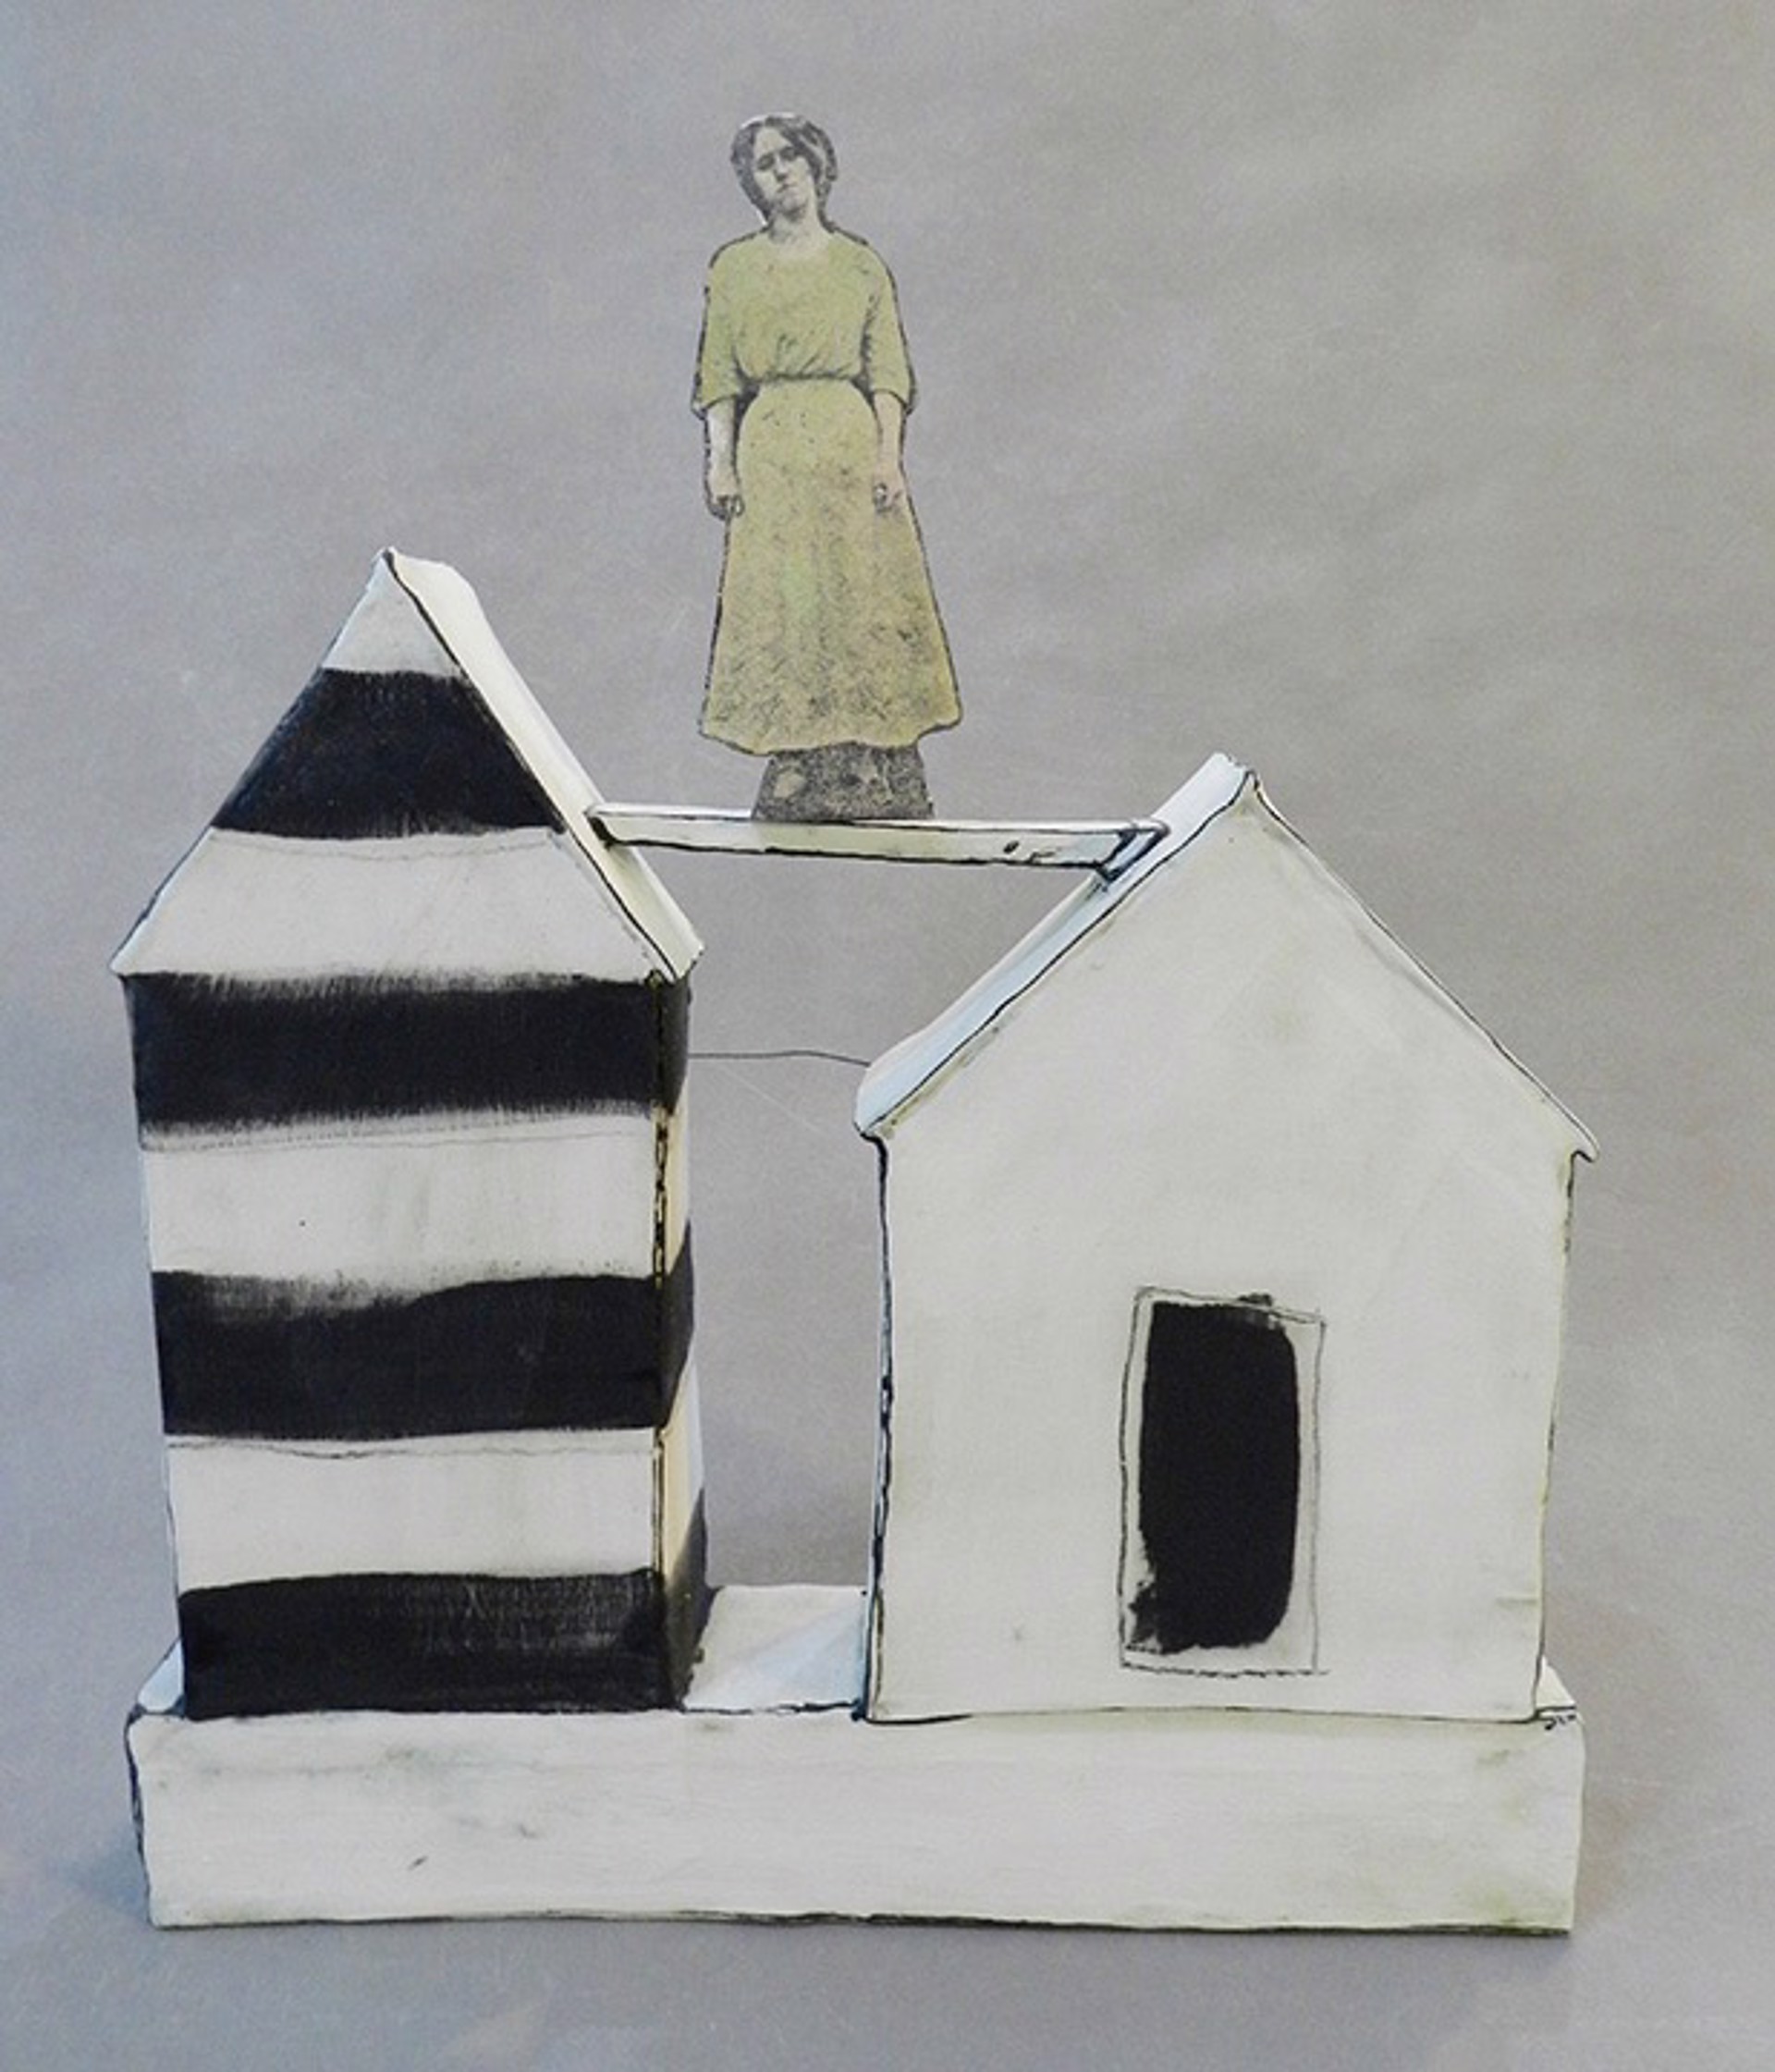 2 Houses, 1 Woman by Mary Fischer